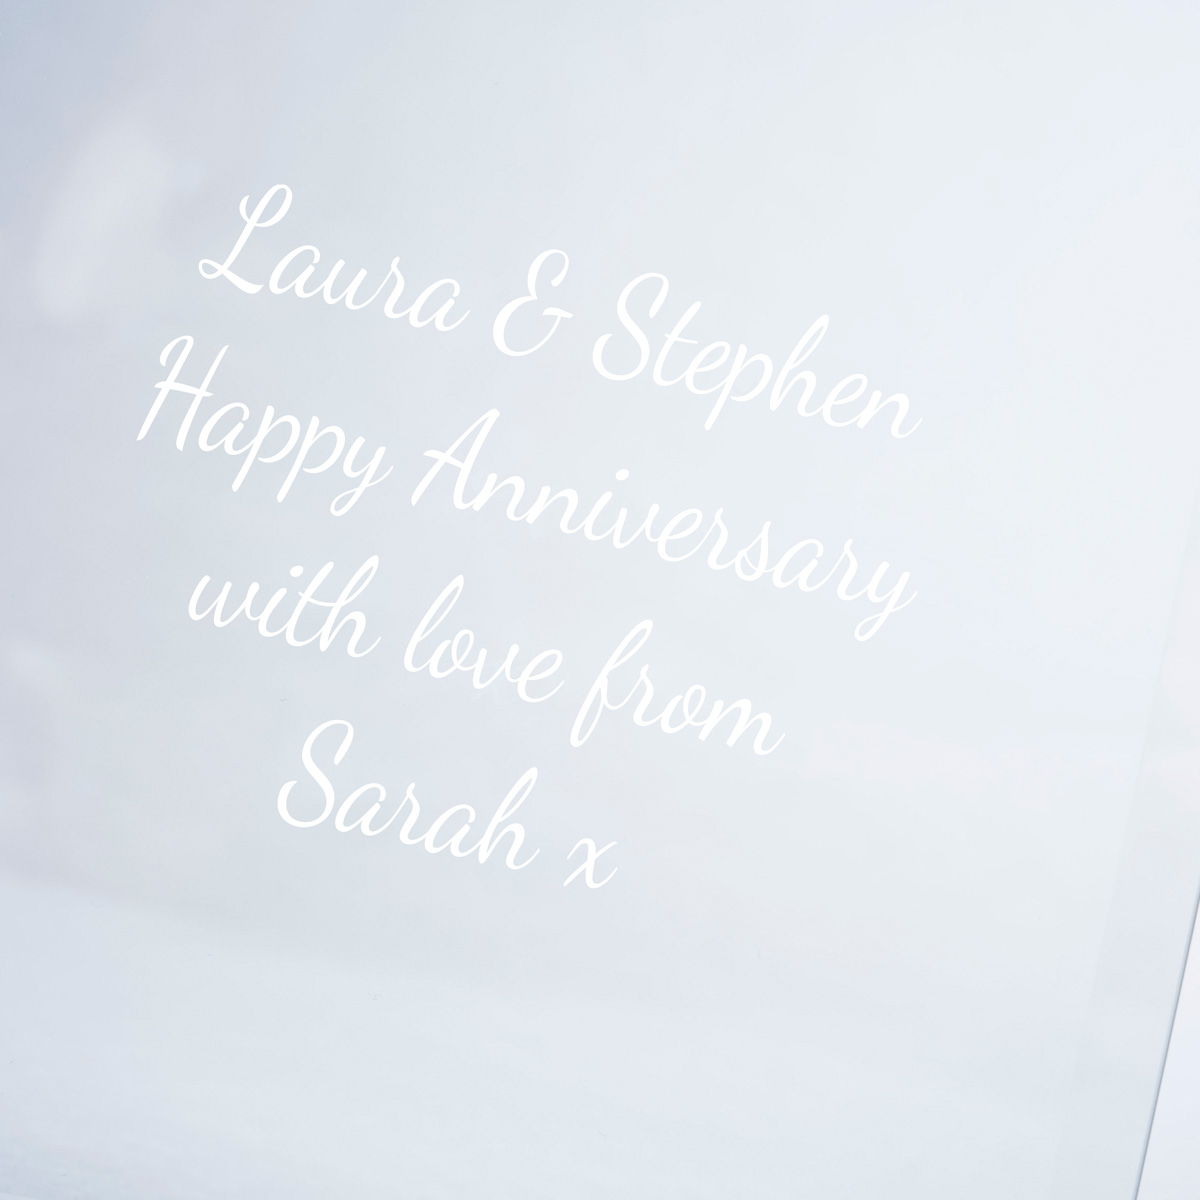 Personalised Curved Glass Photo Frame - Message